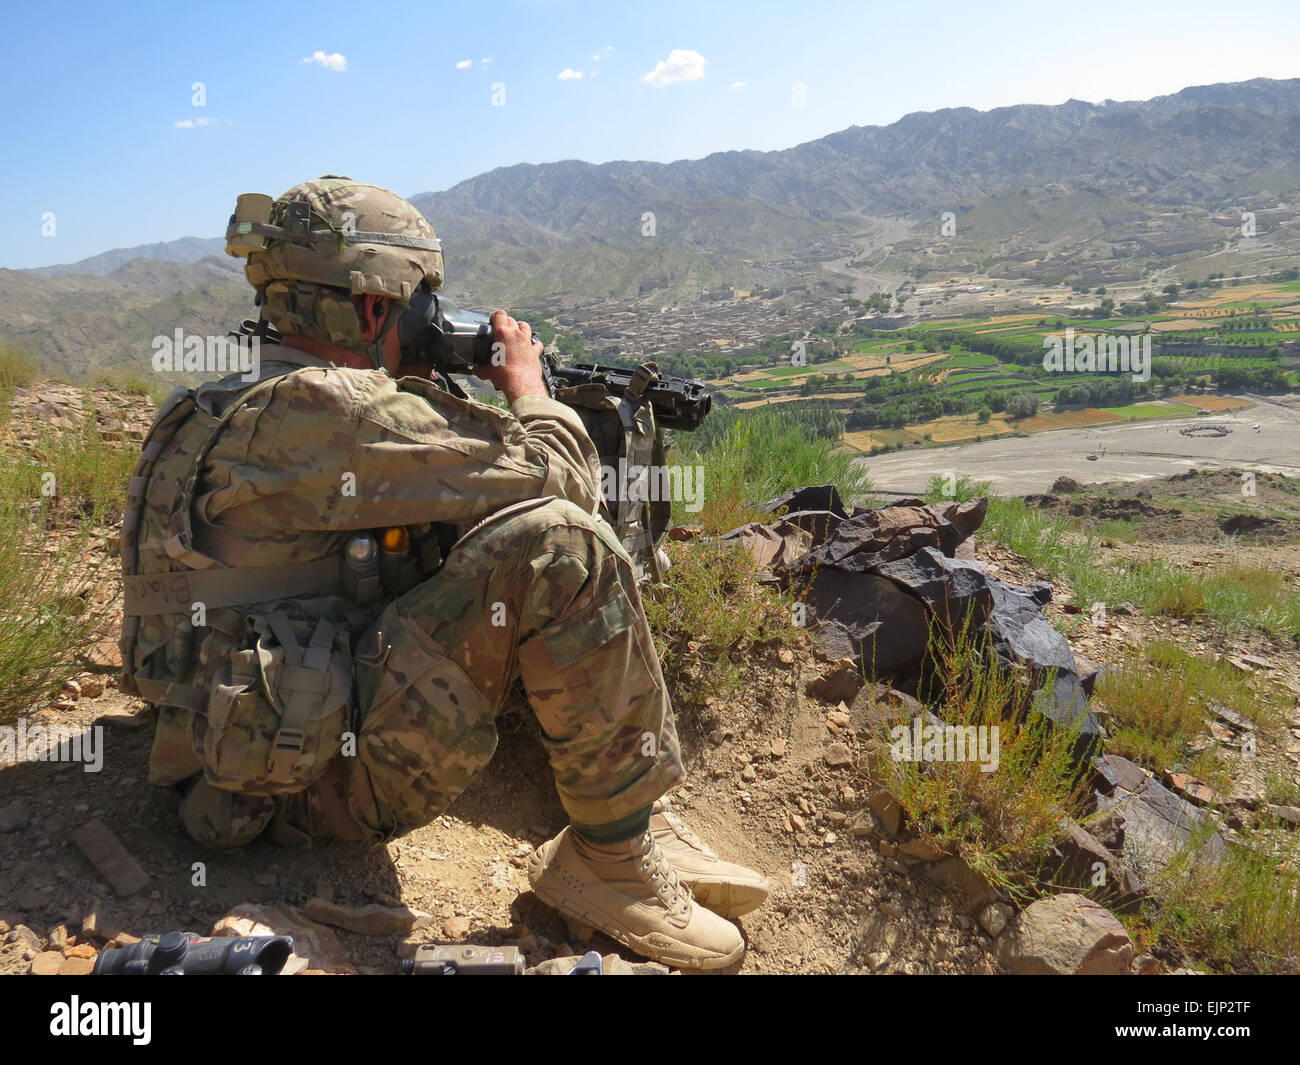 Staff Sgt. Timothy Blackman, a squad leader in Company D, 1st Battalion, 28th Infantry Regiment, 4th Infantry Brigade Combat Team, 1st Infantry Division, provides over watch  security while the Afghan National Army conducts a shura with the people in Pirkowti Valley with the Paktika Province, Jul 1. U.S. Army Courtesy Photo Stock Photo